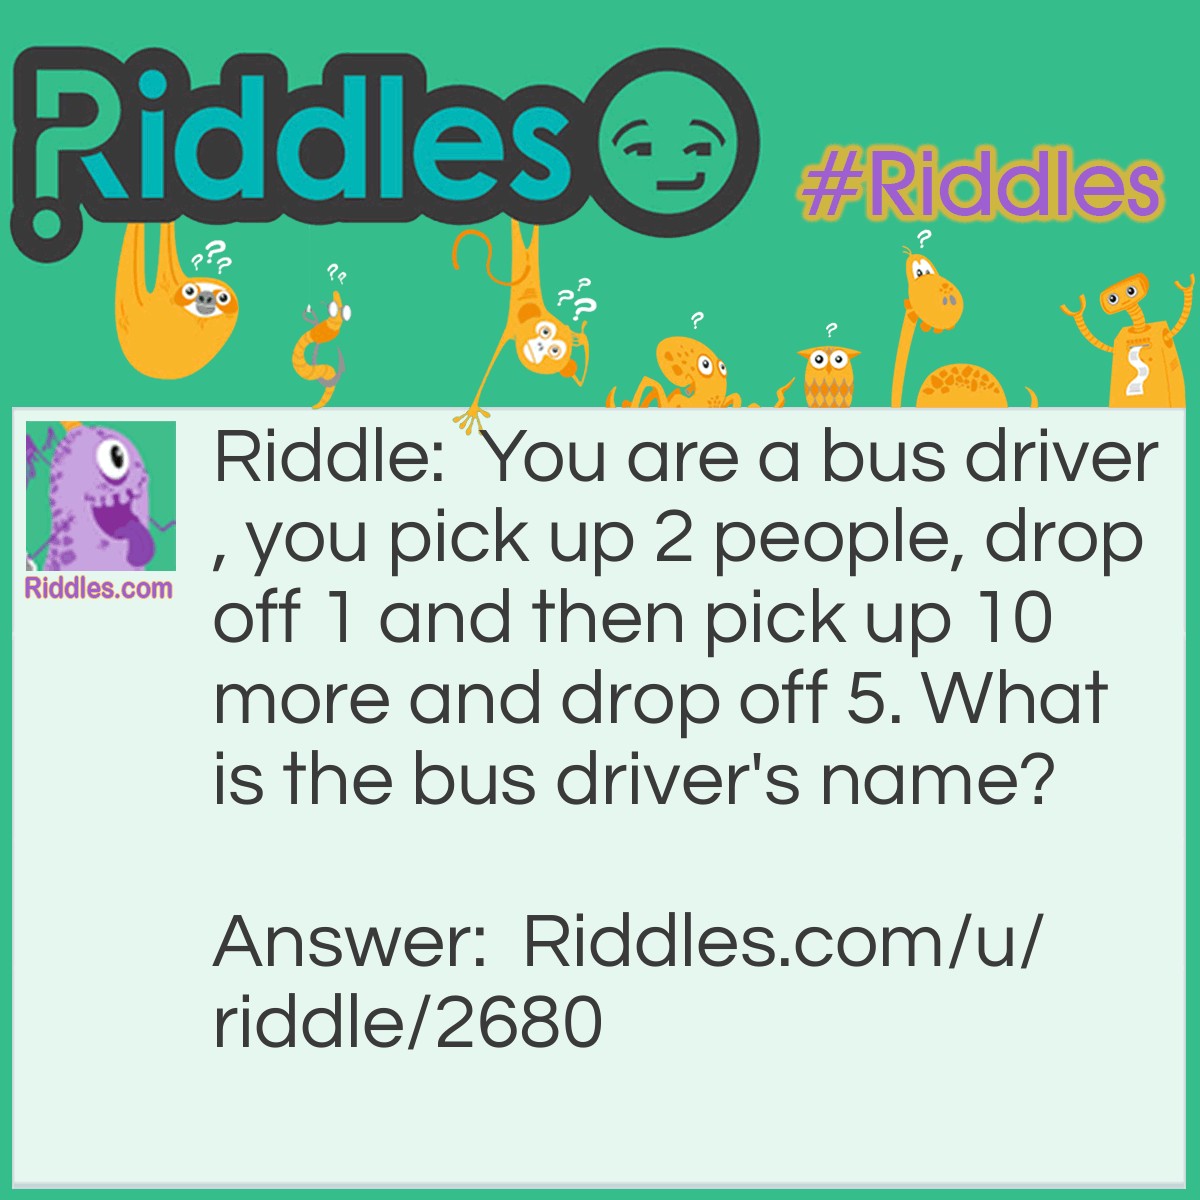 Riddle: You are a bus driver, you pick up 2 people, drop off 1 and then pick up 10 more and drop off 5. What is the bus driver's name? Answer: It is what ever your name is.